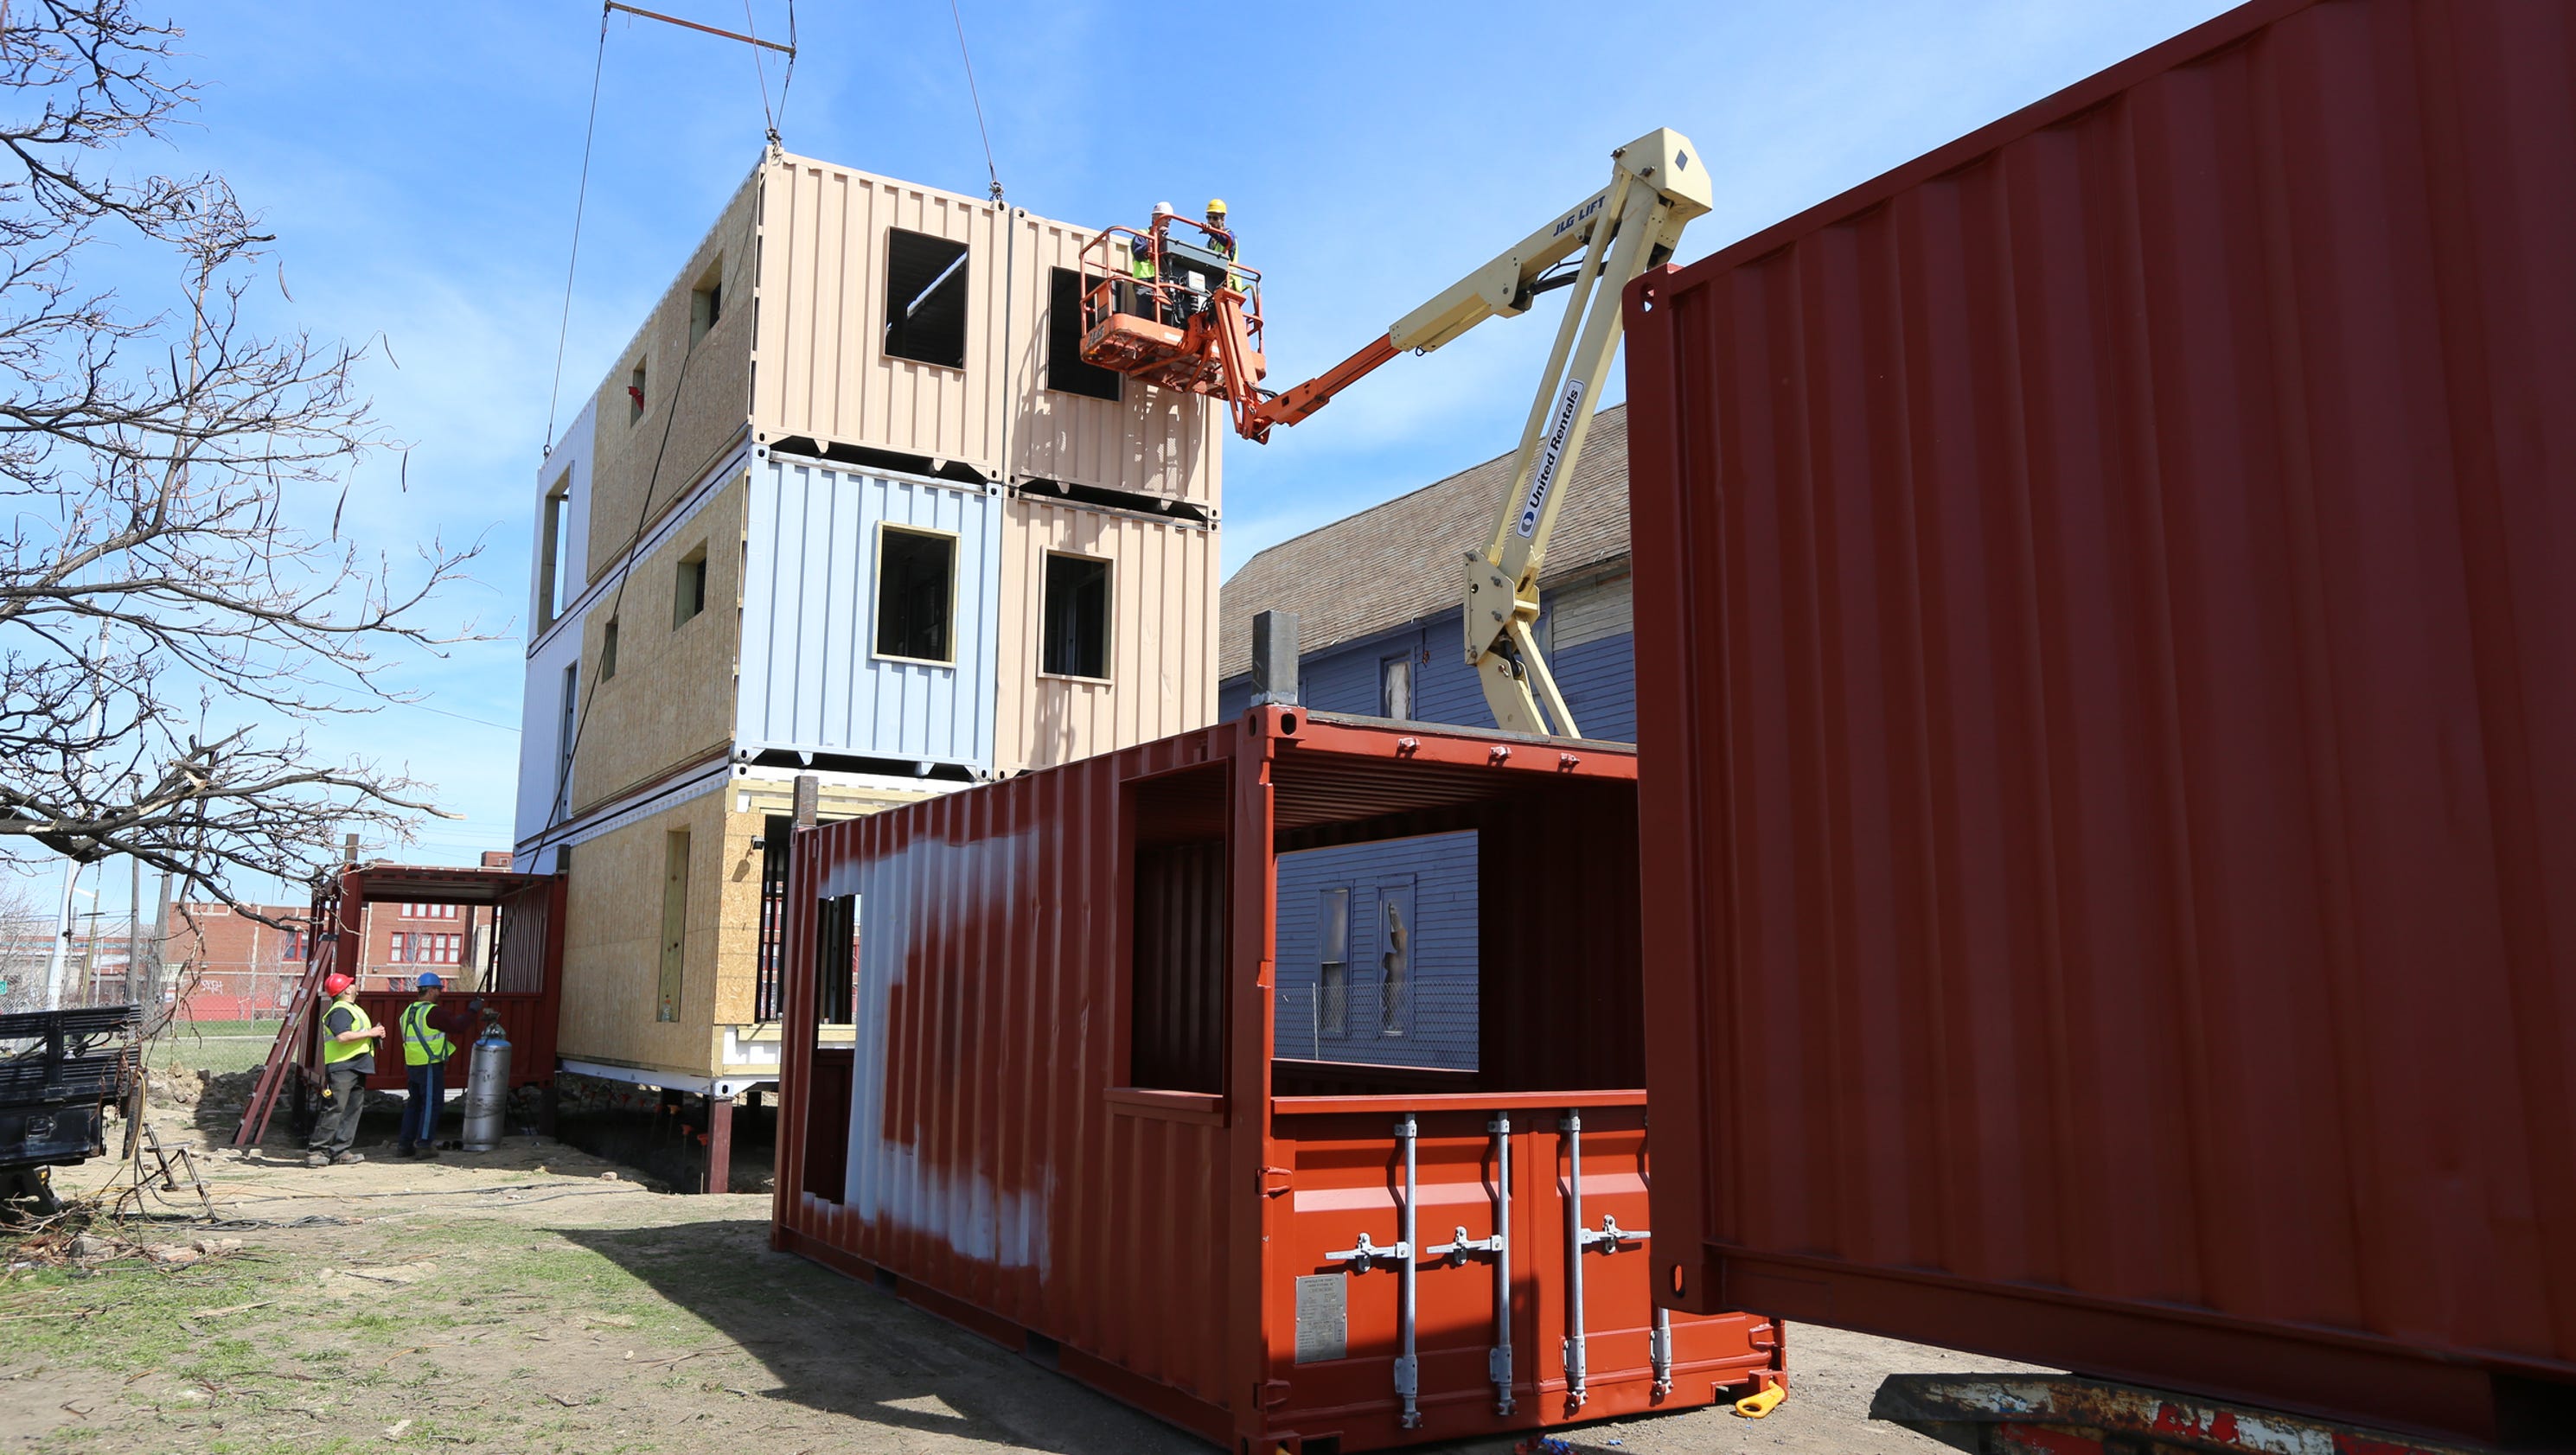 Shipping Container Projects. Clawson Container mi. Containers worker. First Container – Detroit. Container projects